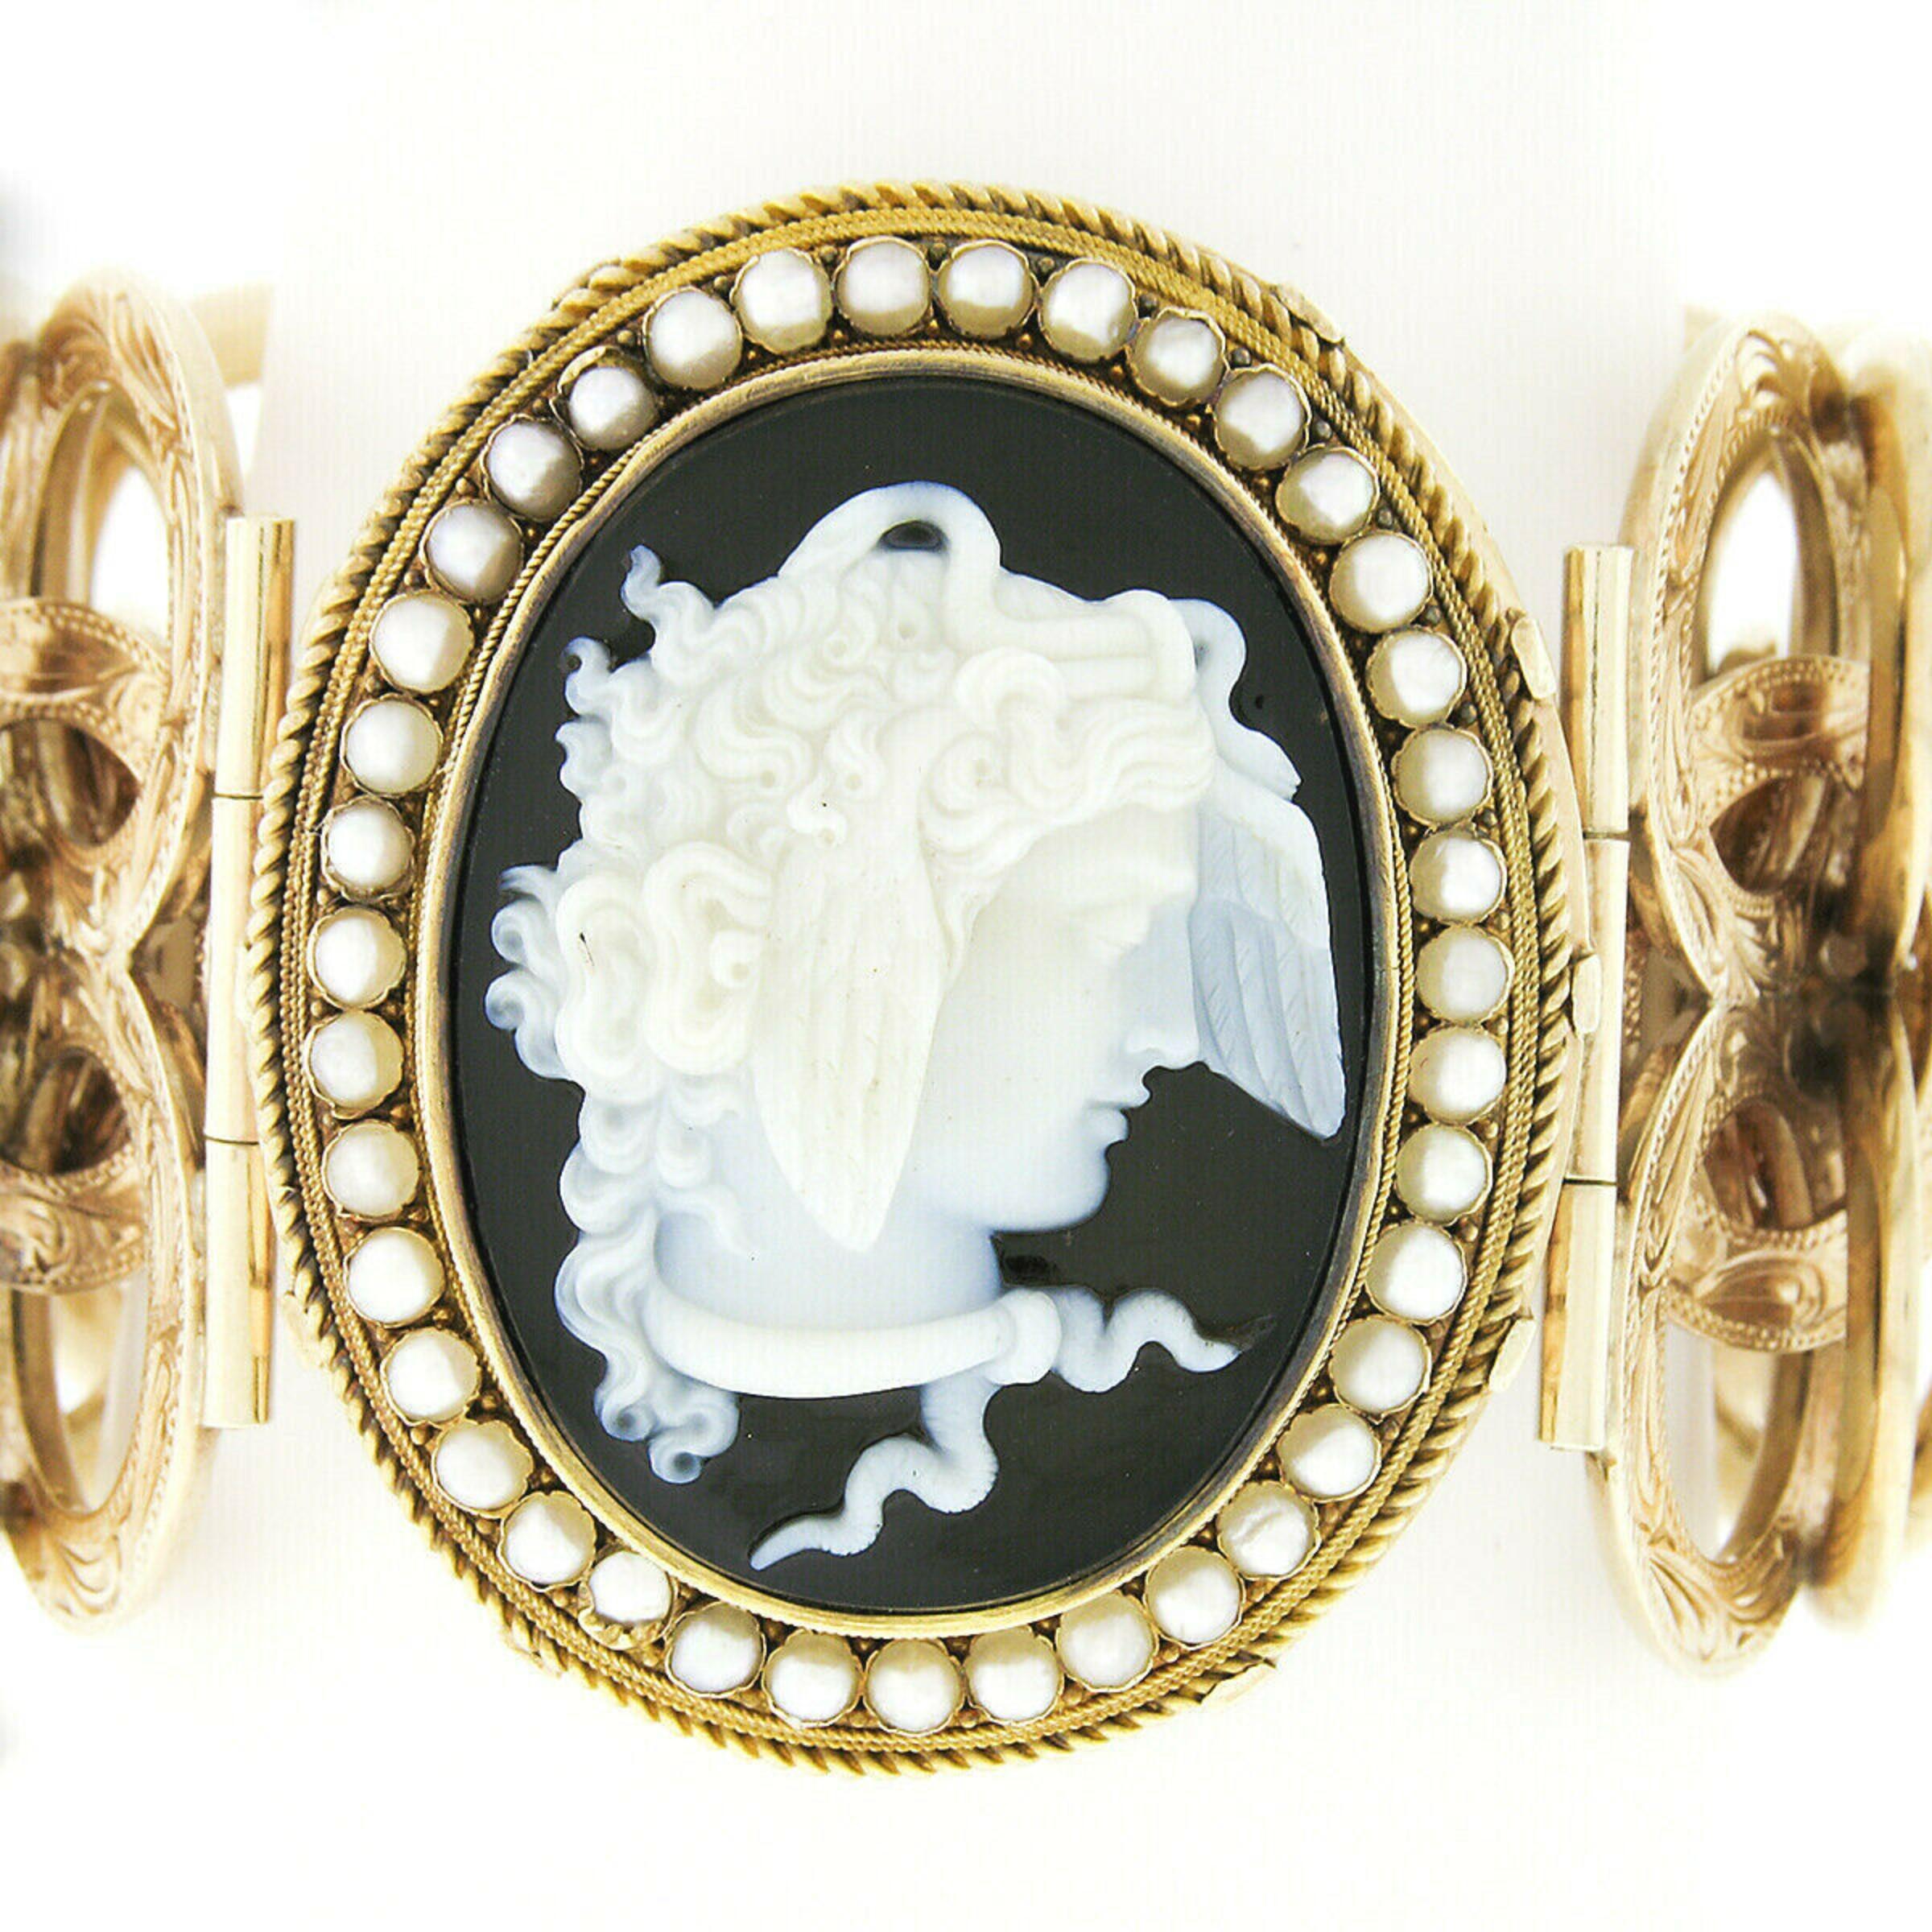 Late Victorian Antique Victorian 14k Gold Large Black Onyx Cameo & Pearl Hand Engraved Bracelet